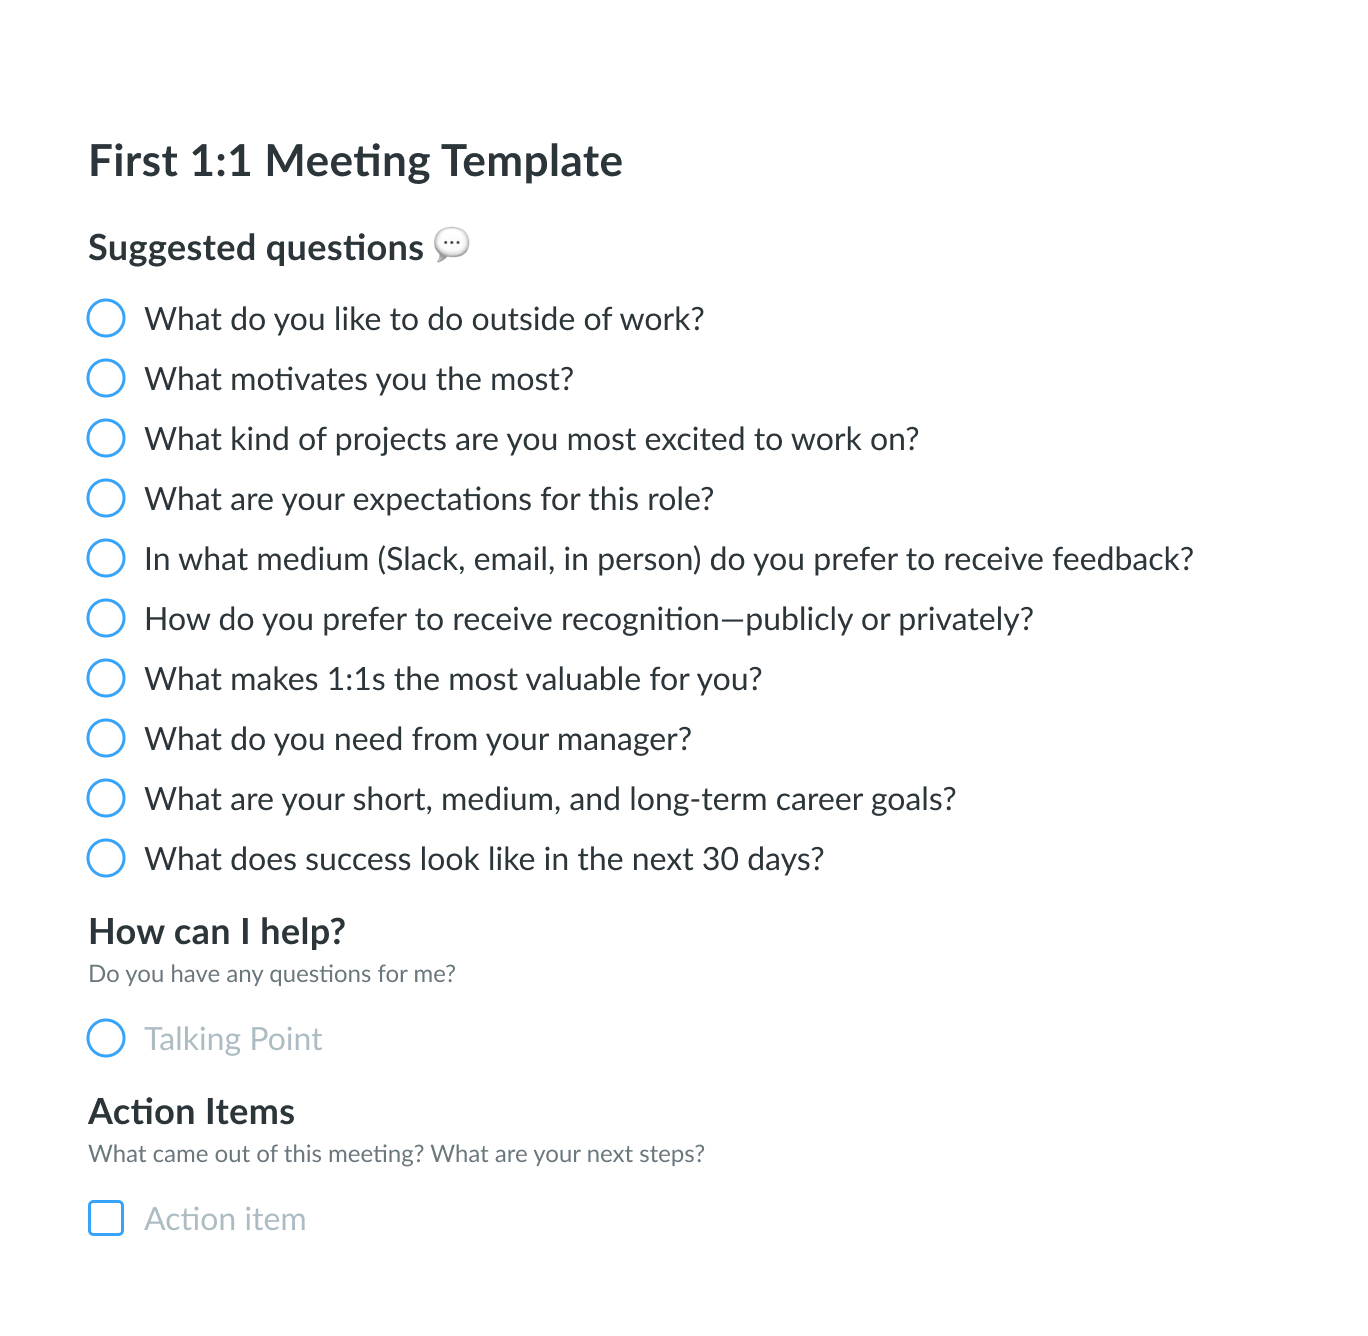 [Template] First OneonOne Meeting with a New Employee Fellow.app